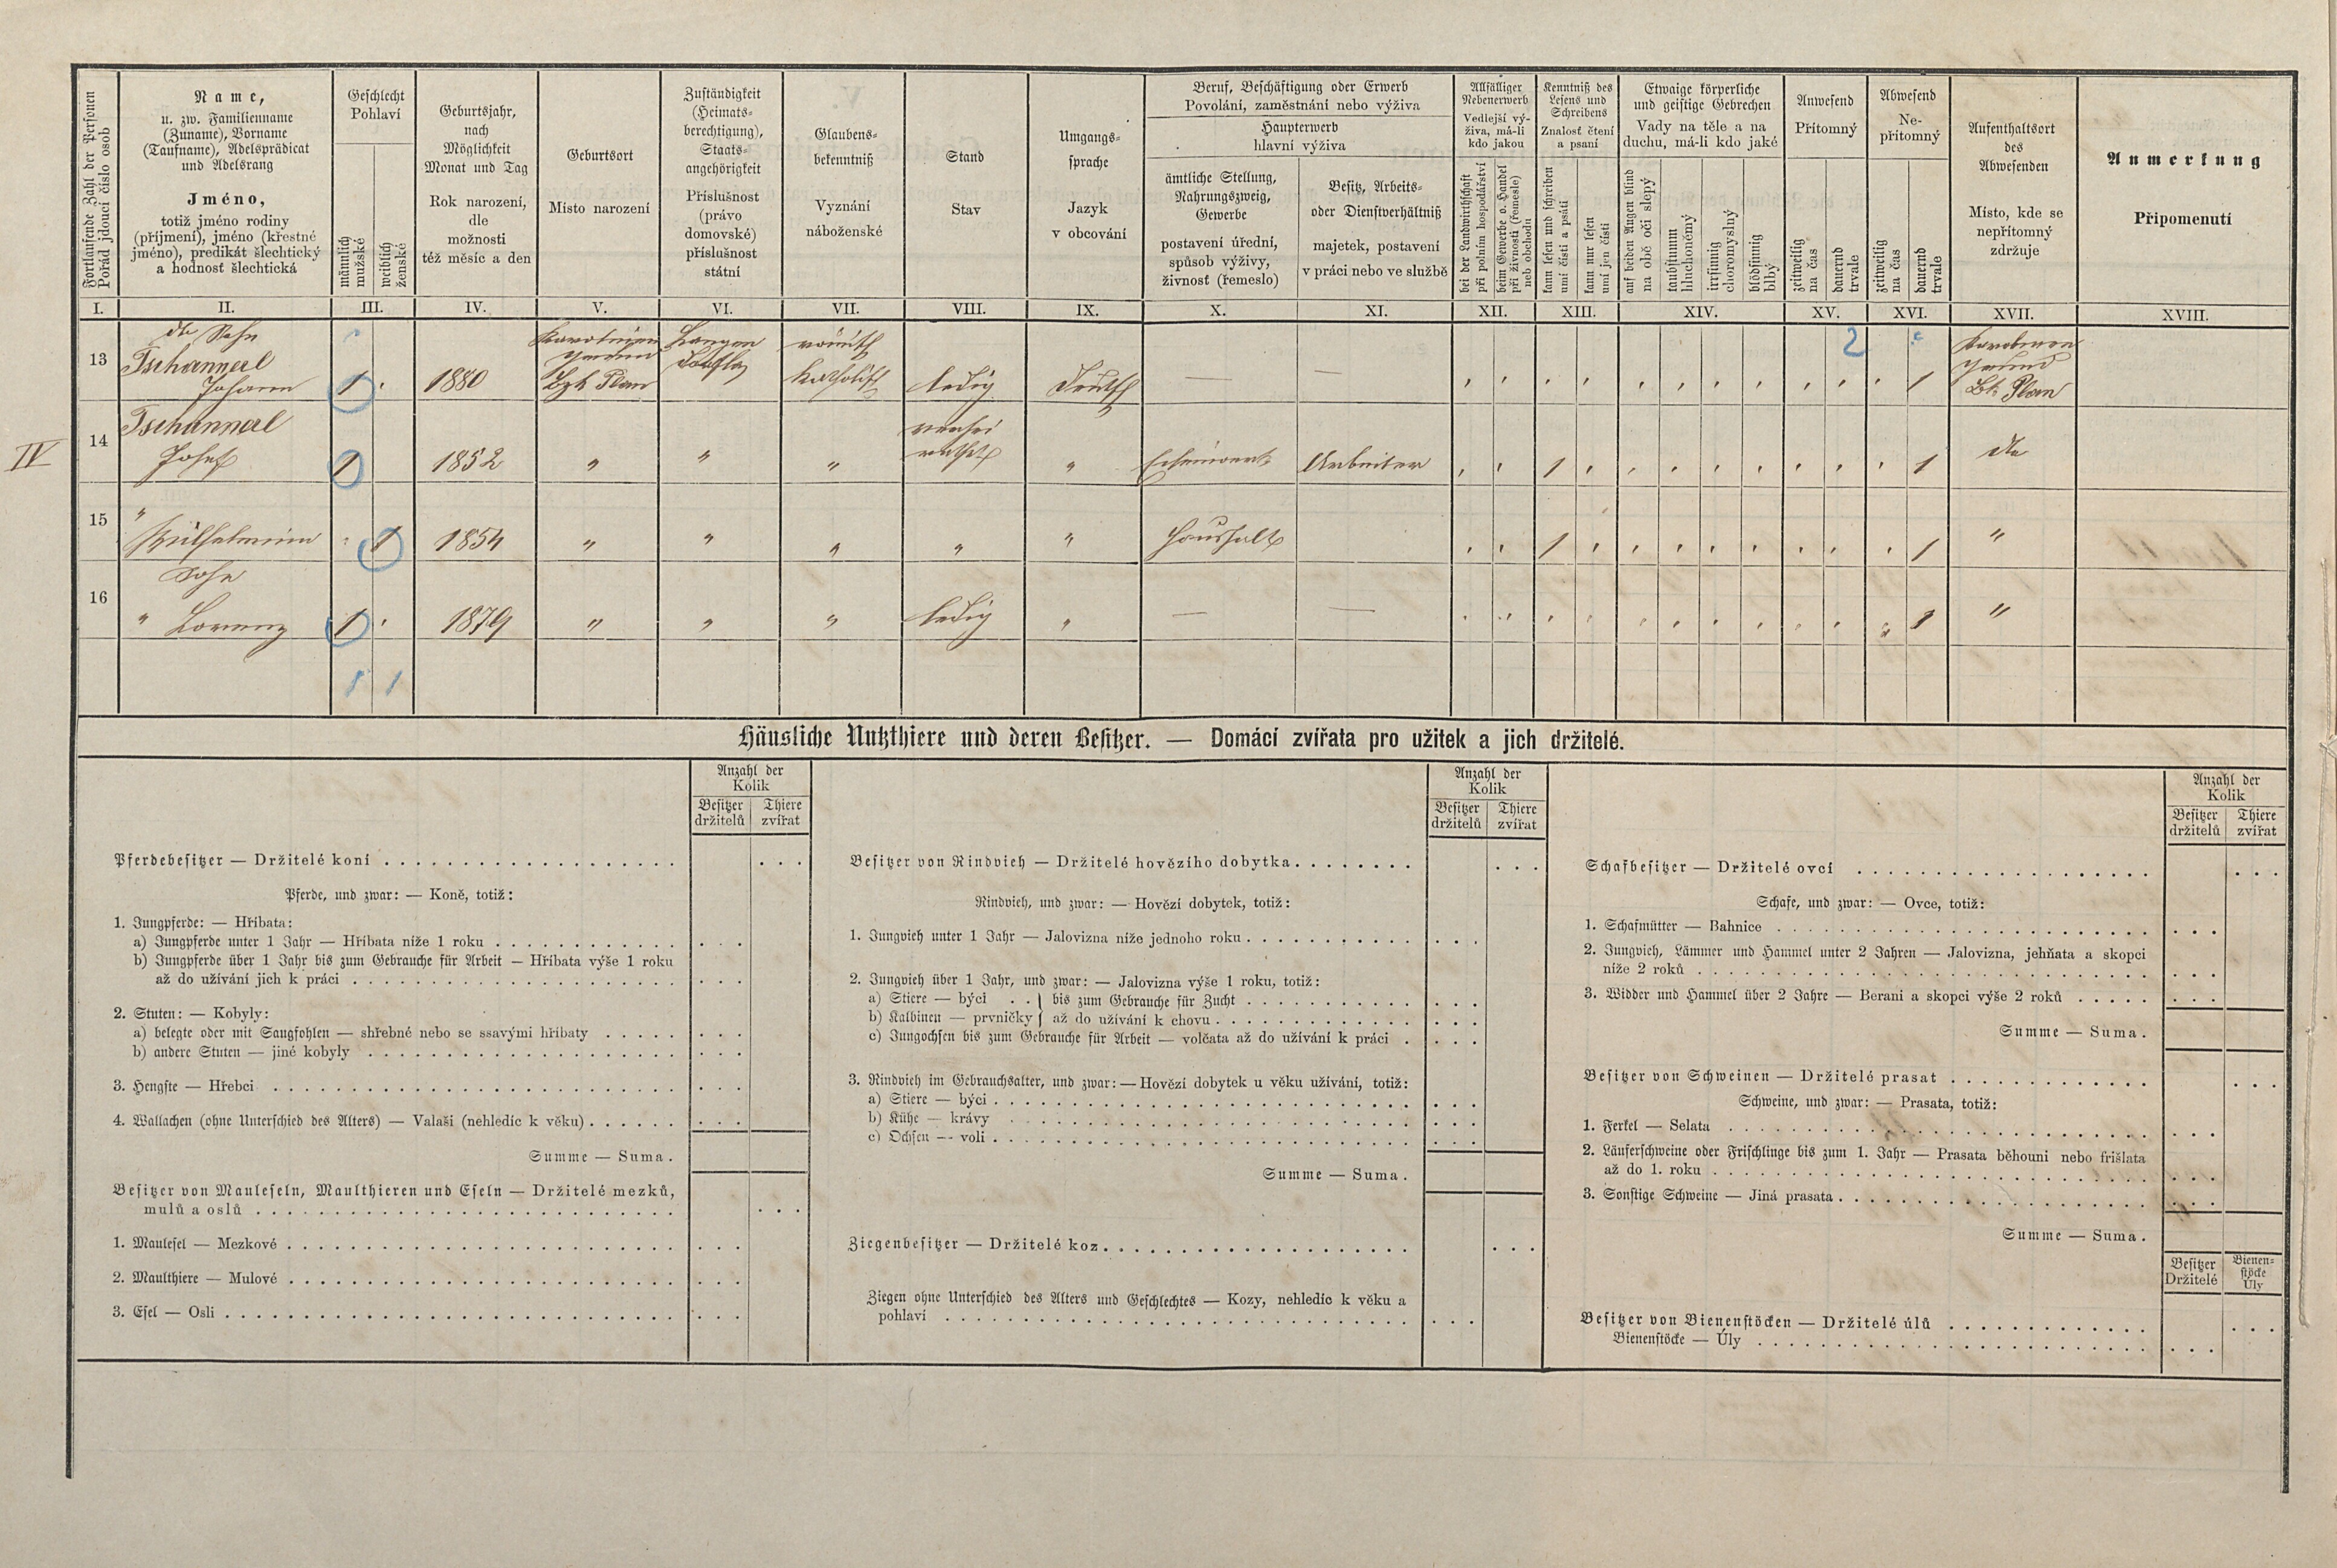 4. soap-tc_00192_census-1880-dlouhy-ujezd-cp036_0040